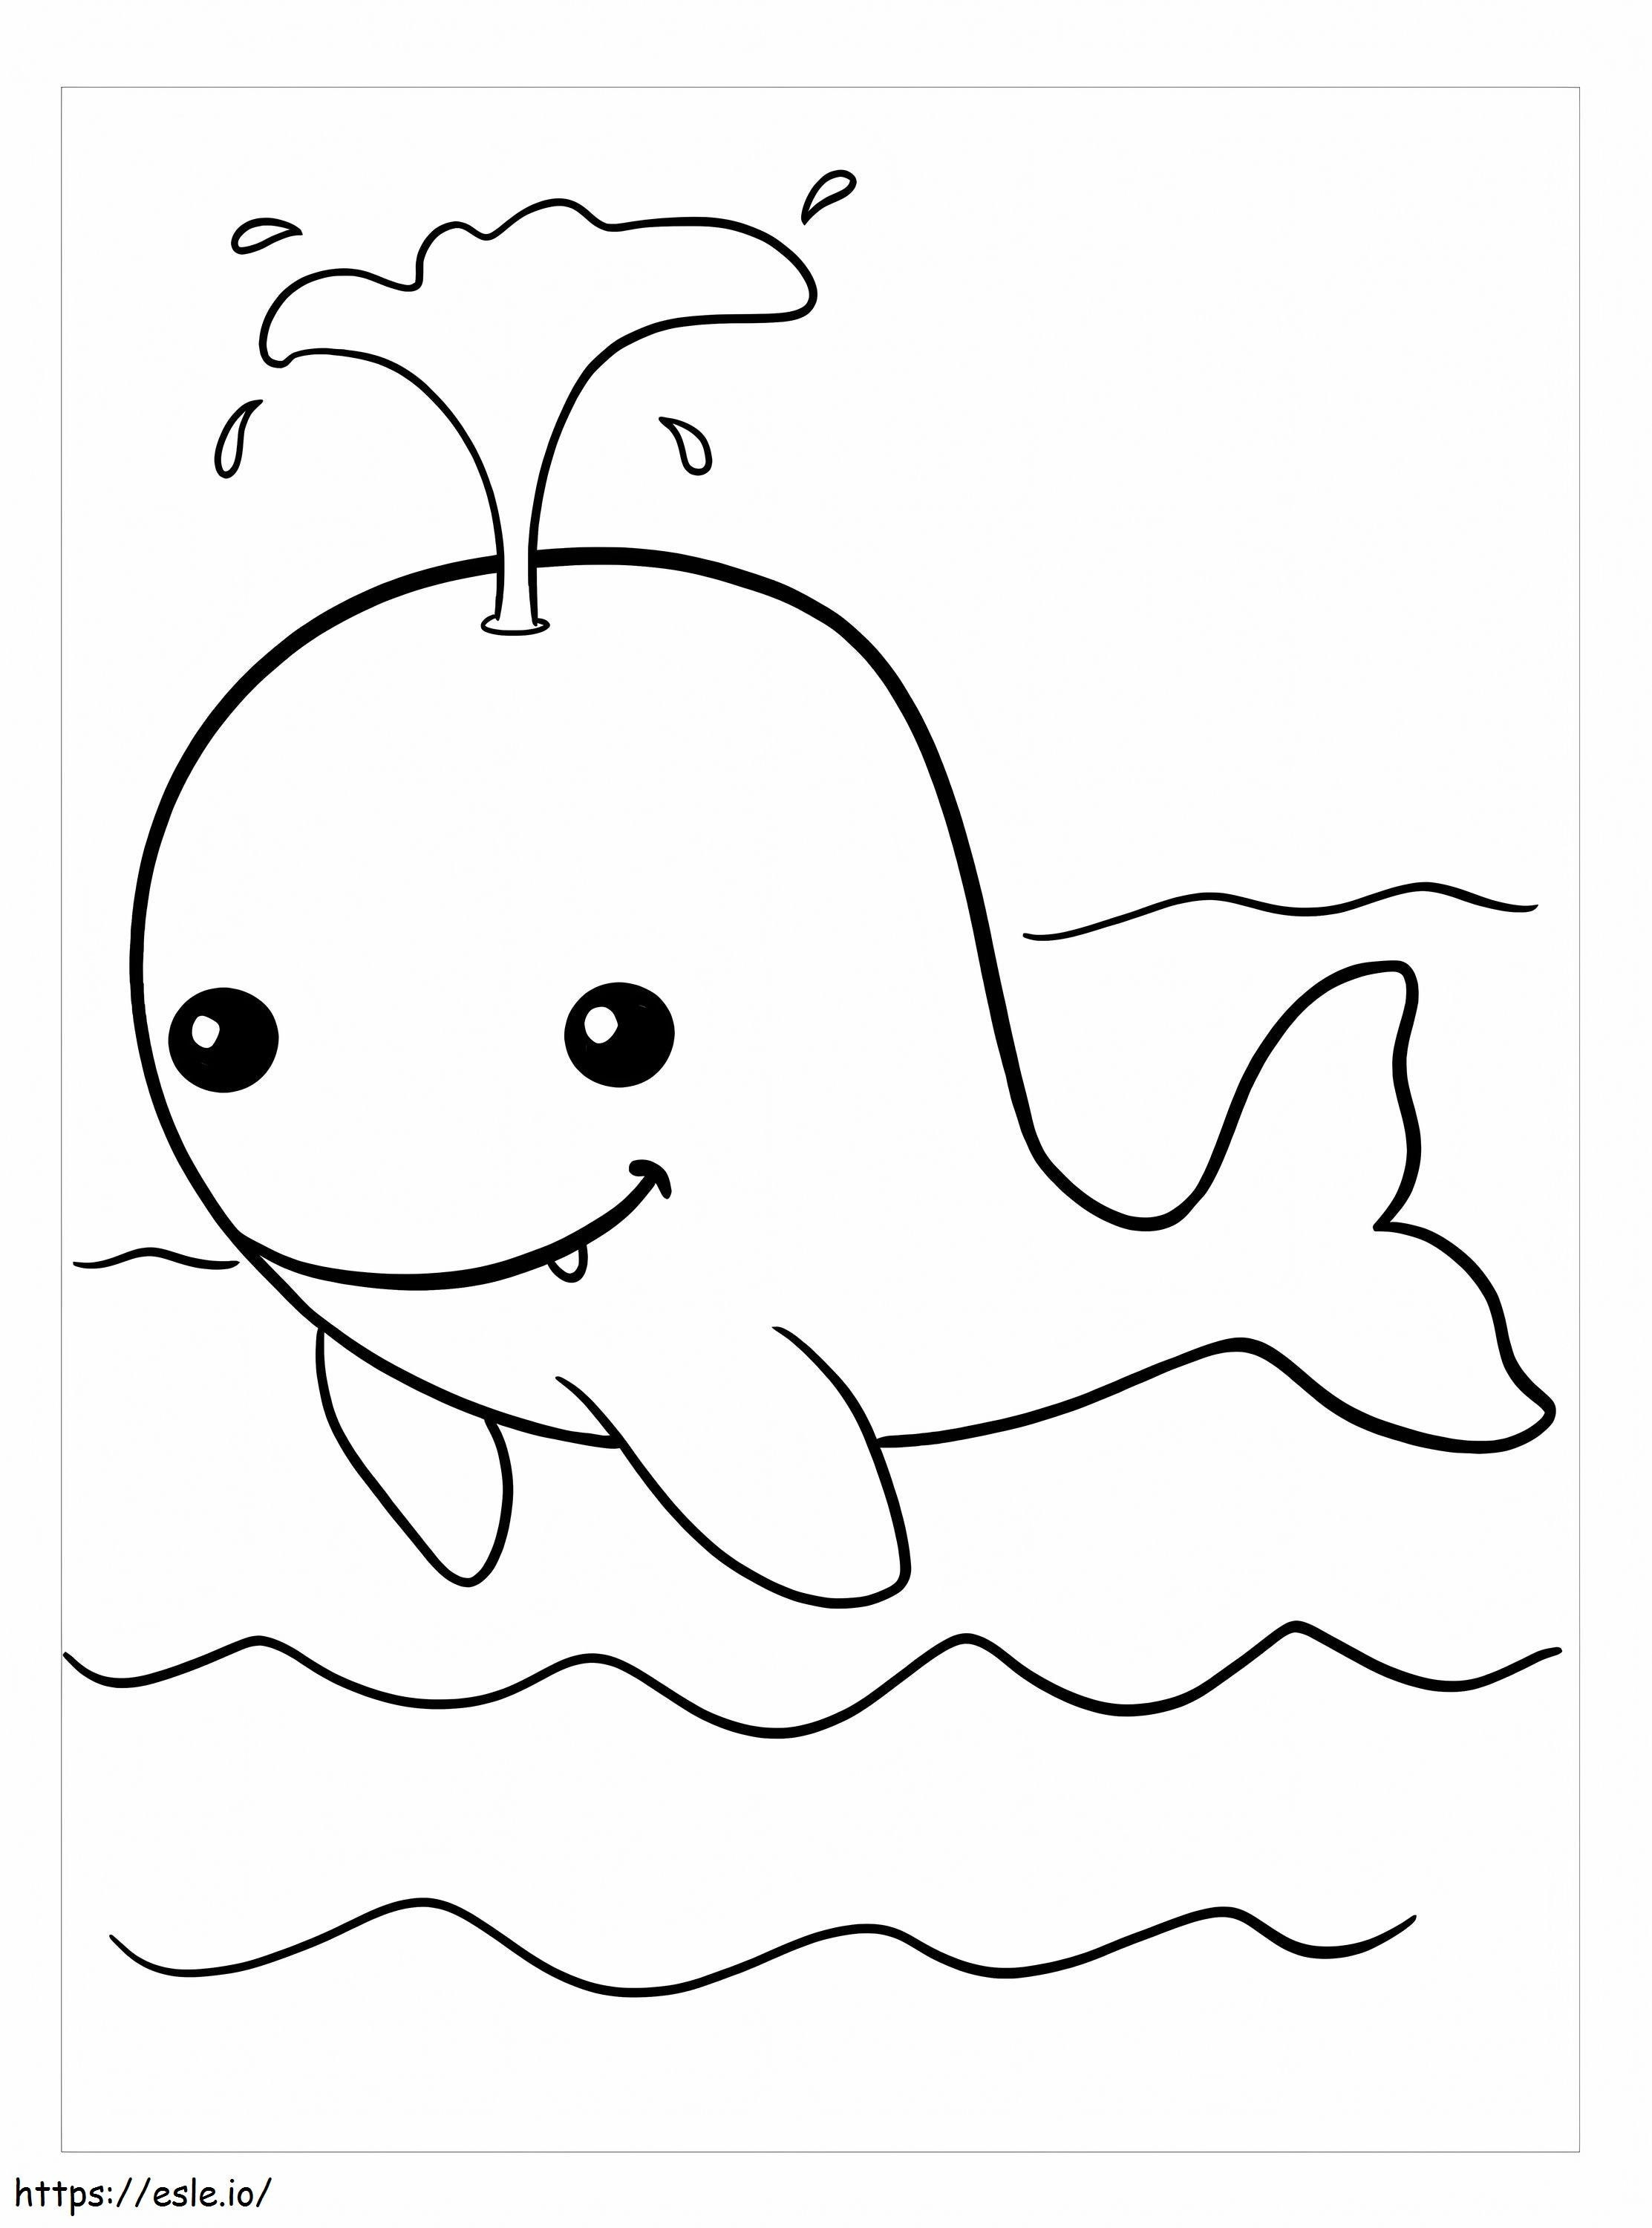 Cute Smiling Whale coloring page